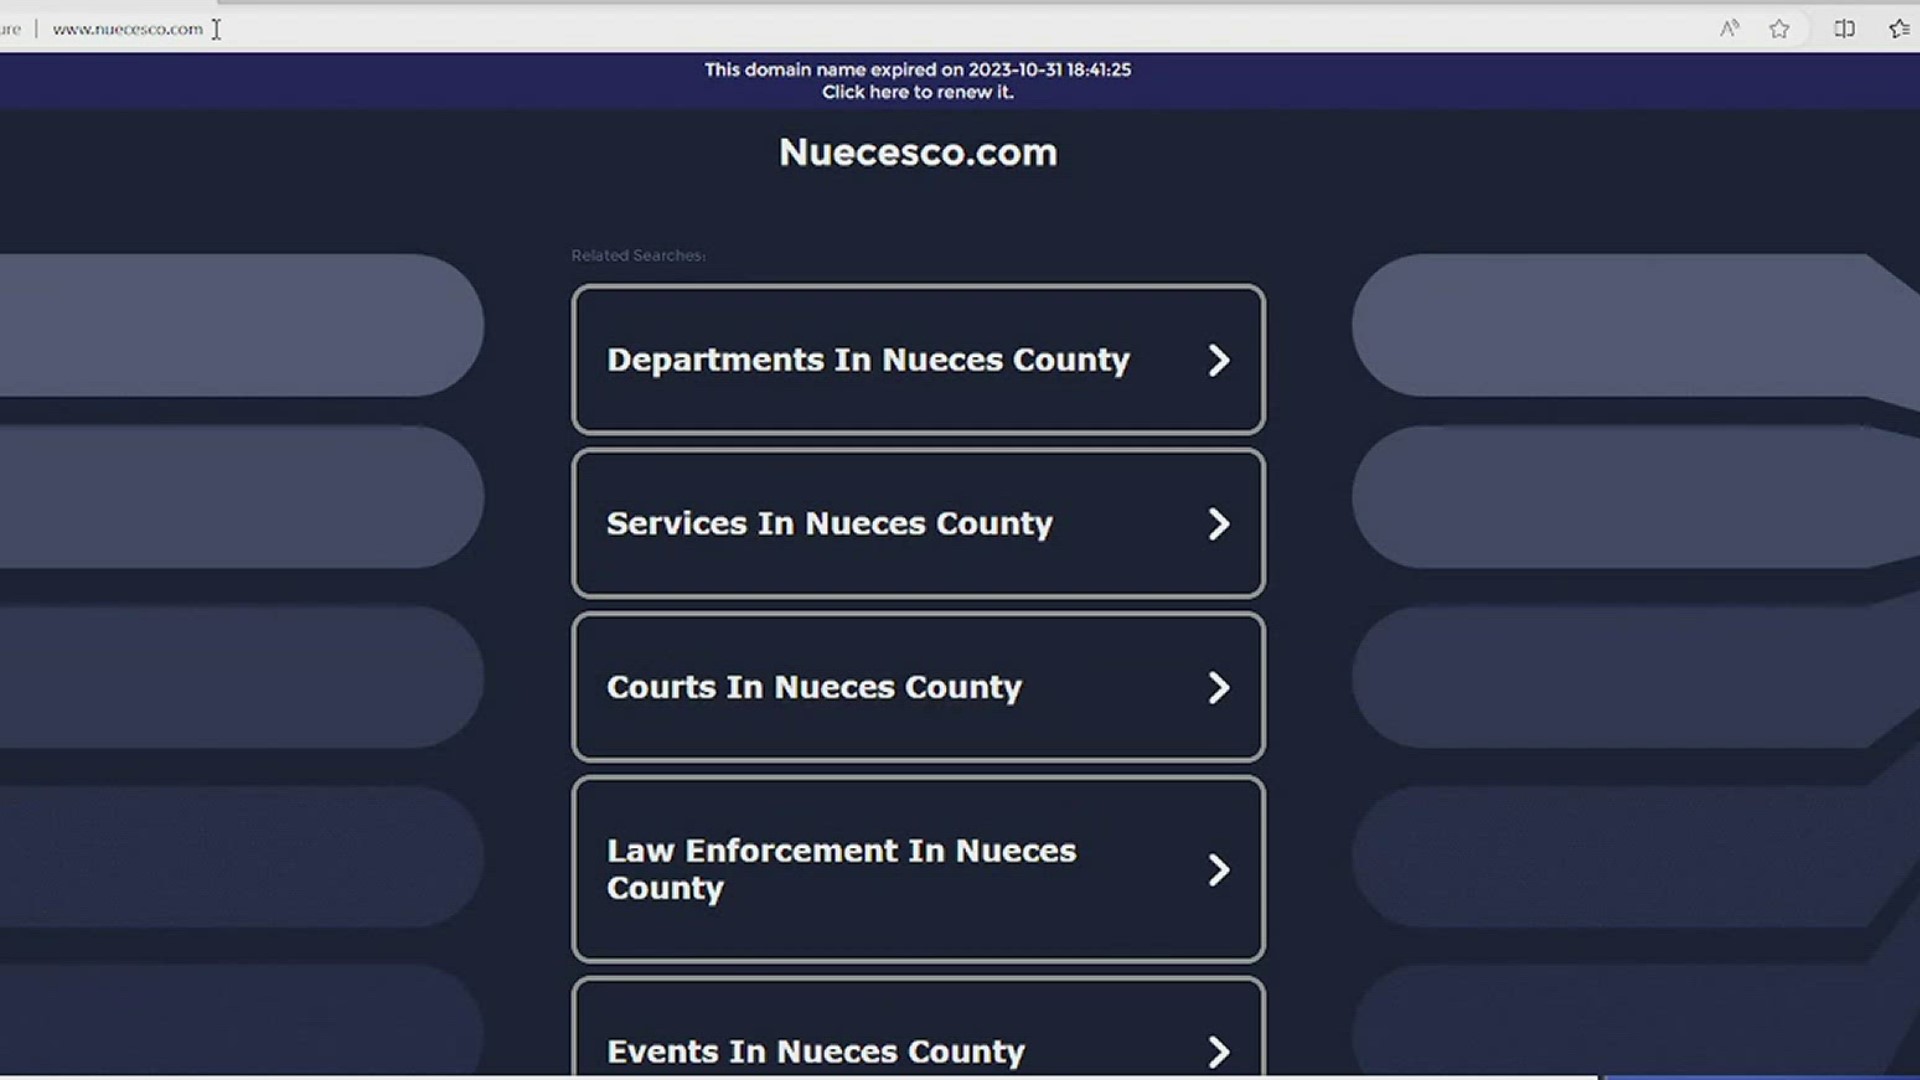 The county announced on social media Saturday that no one else ever purchased the original domain name, and that they were just pending its renewal.